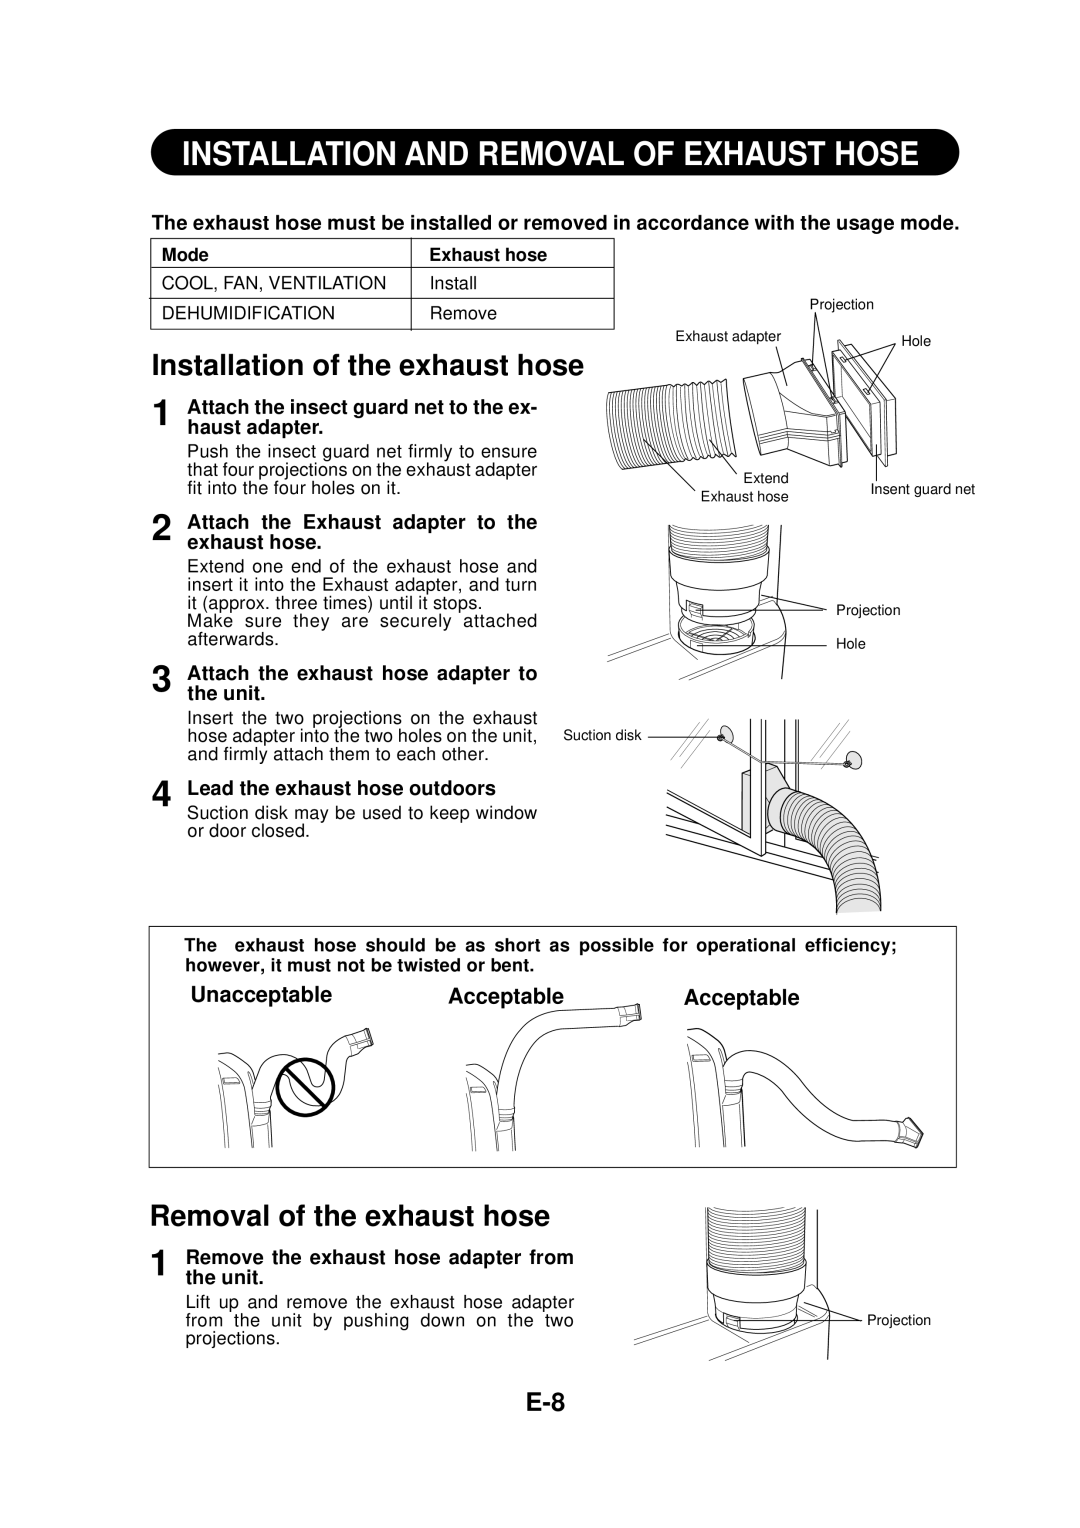 Sharp CV-P09FR Installation And Removal Of Exhaust Hose, Installation of the exhaust hose, Removal of the exhaust hose 